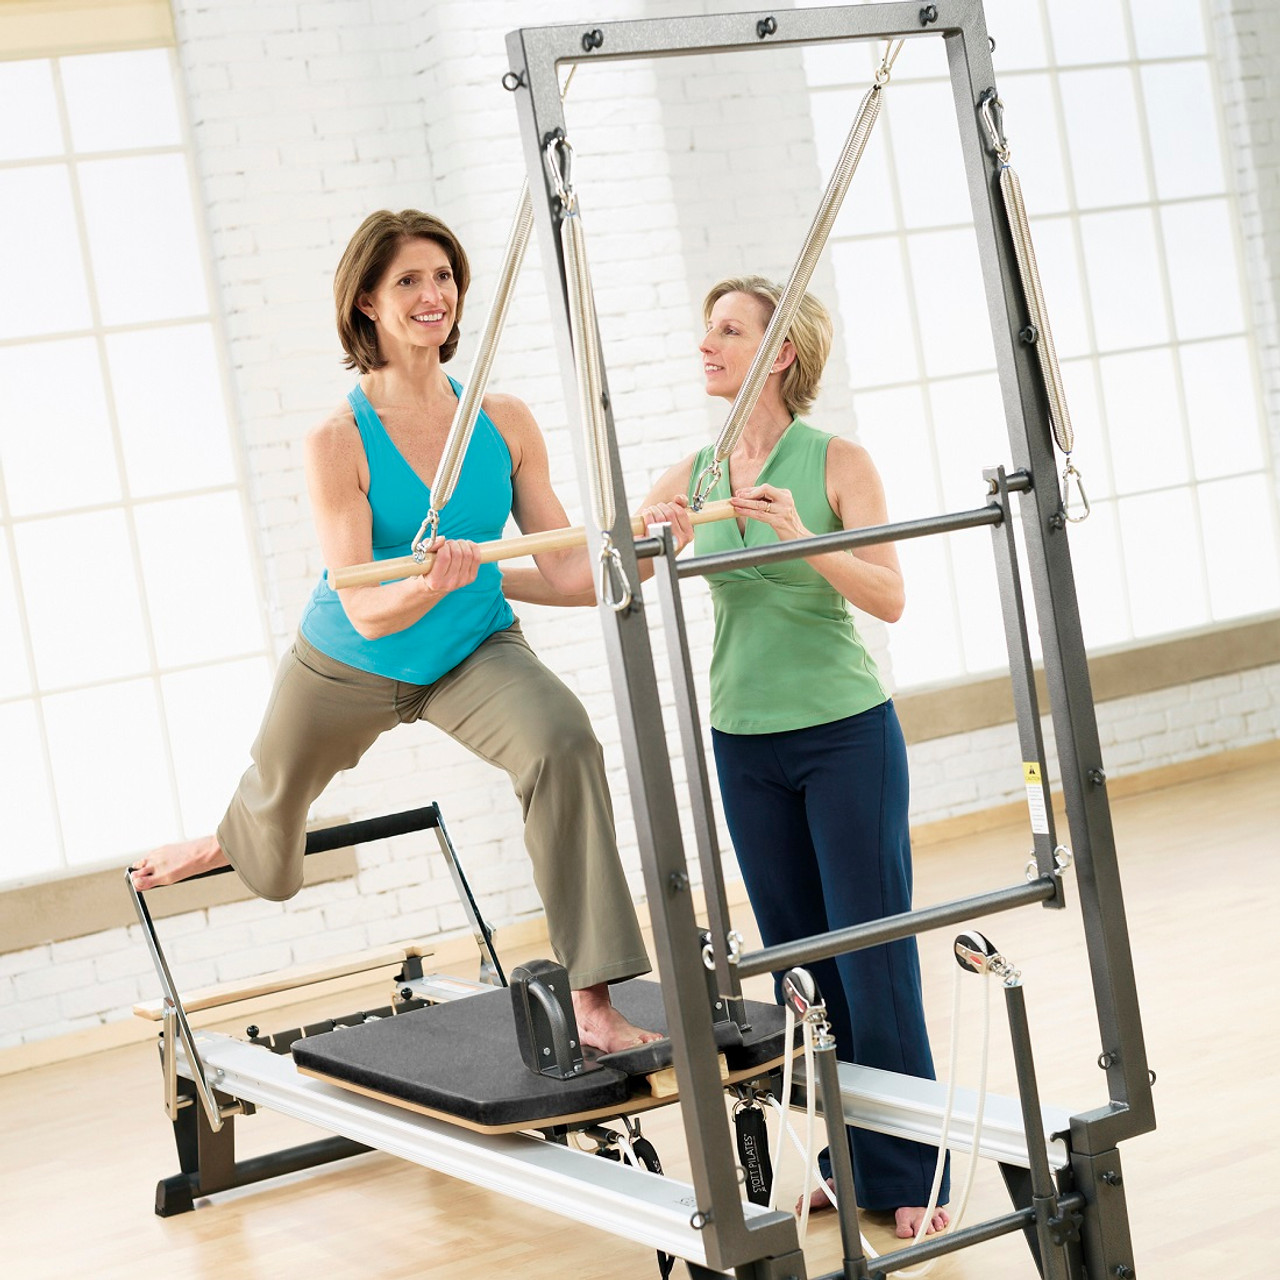 Stott Pilates by Merrithew V2 MAX PLUS Reformer with Deluxe Bundle